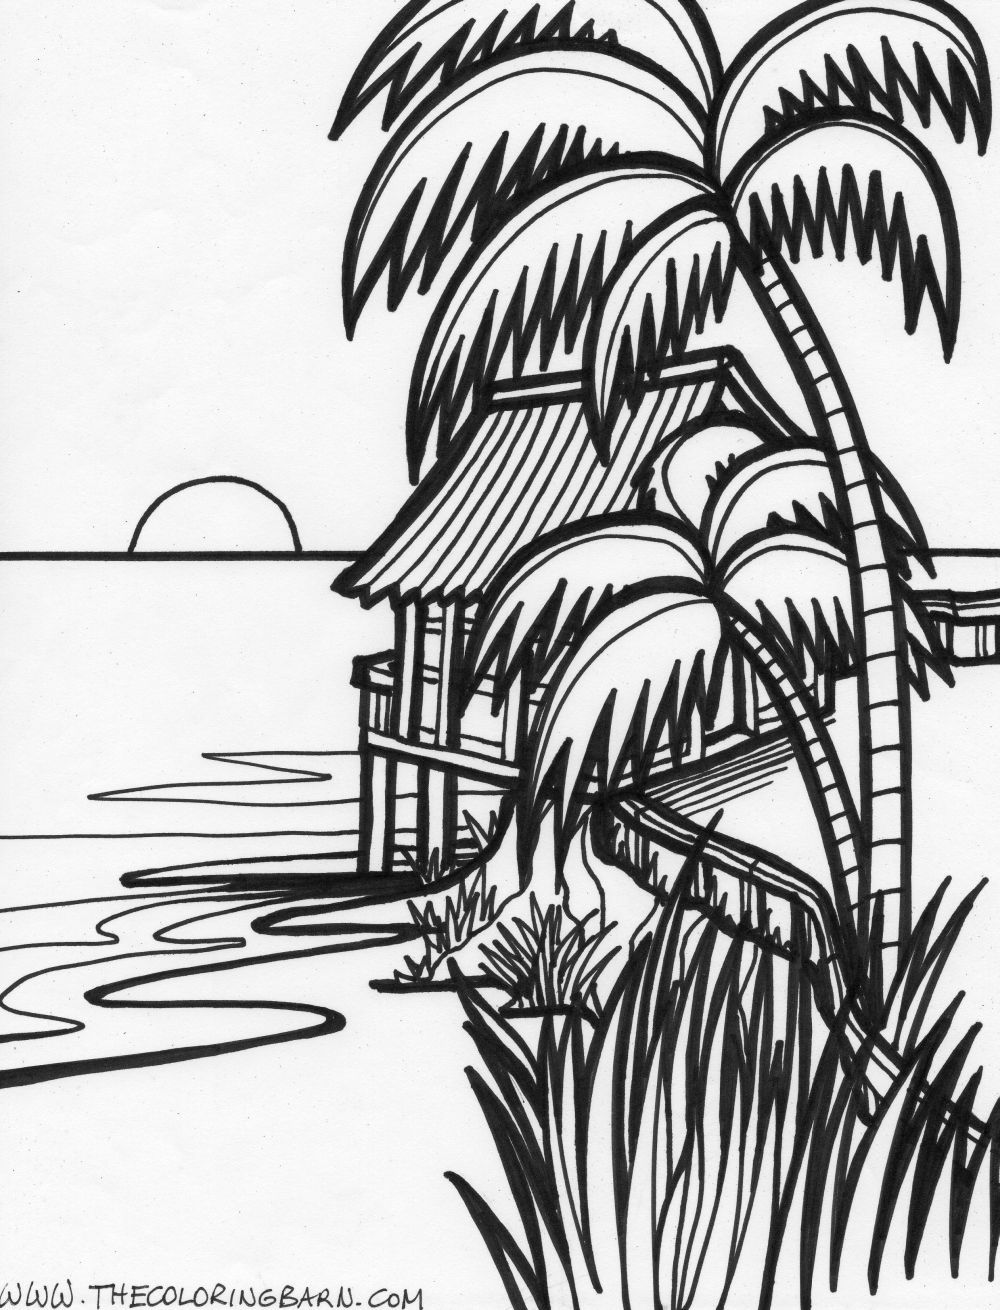 Coloring Pages : 48 Beach Sunset Coloring Pages Photo Ideas ...